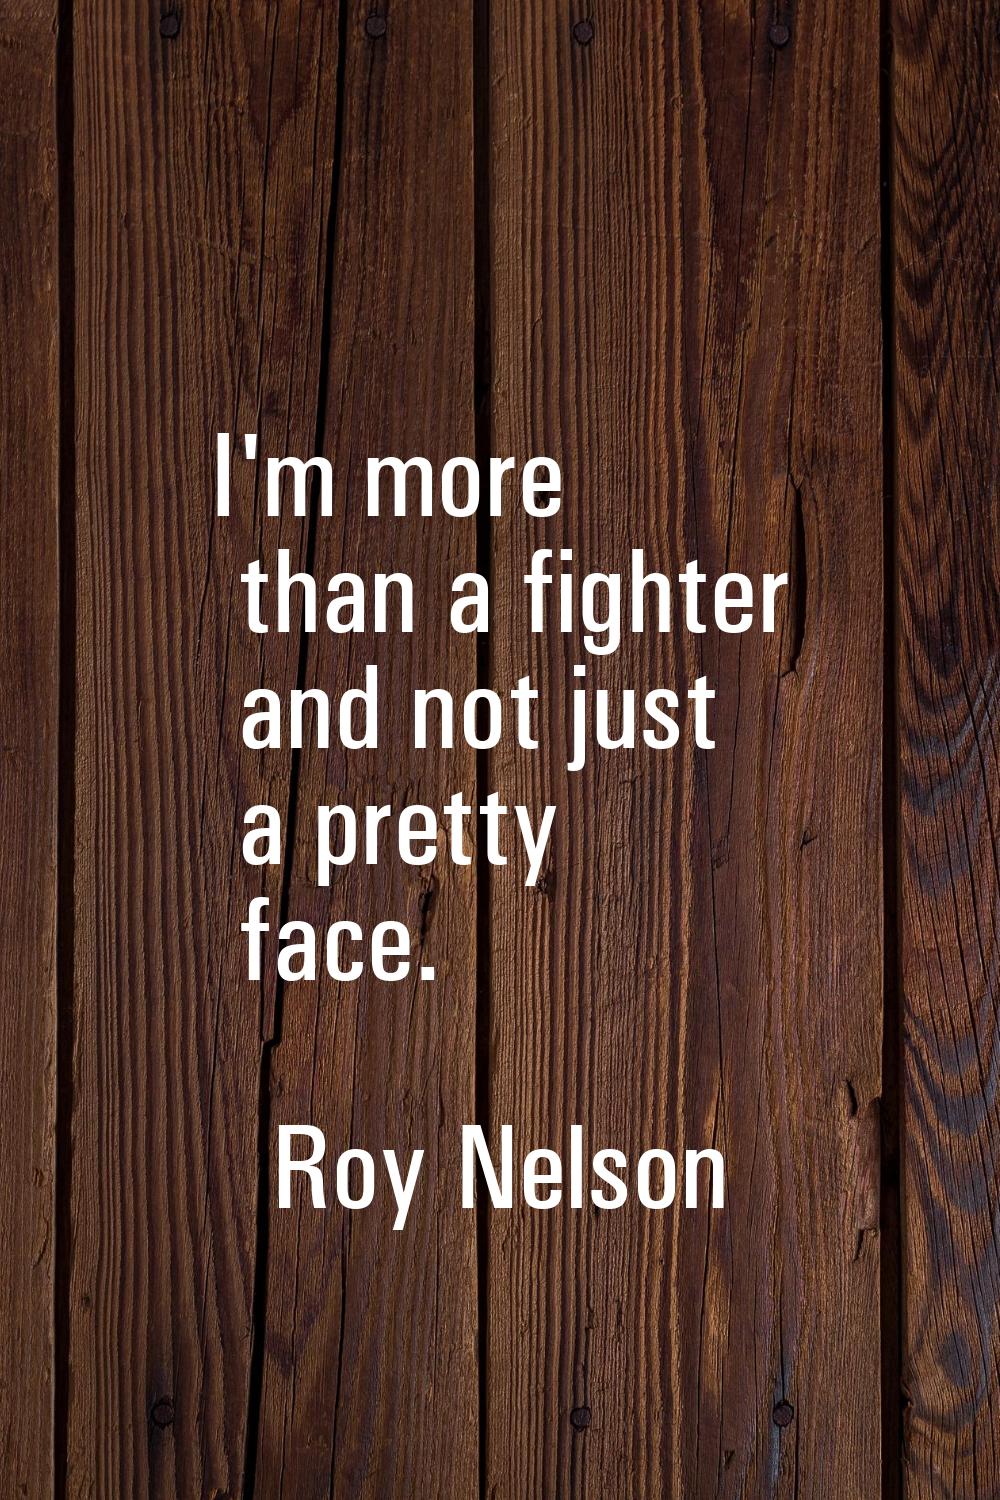 I'm more than a fighter and not just a pretty face.